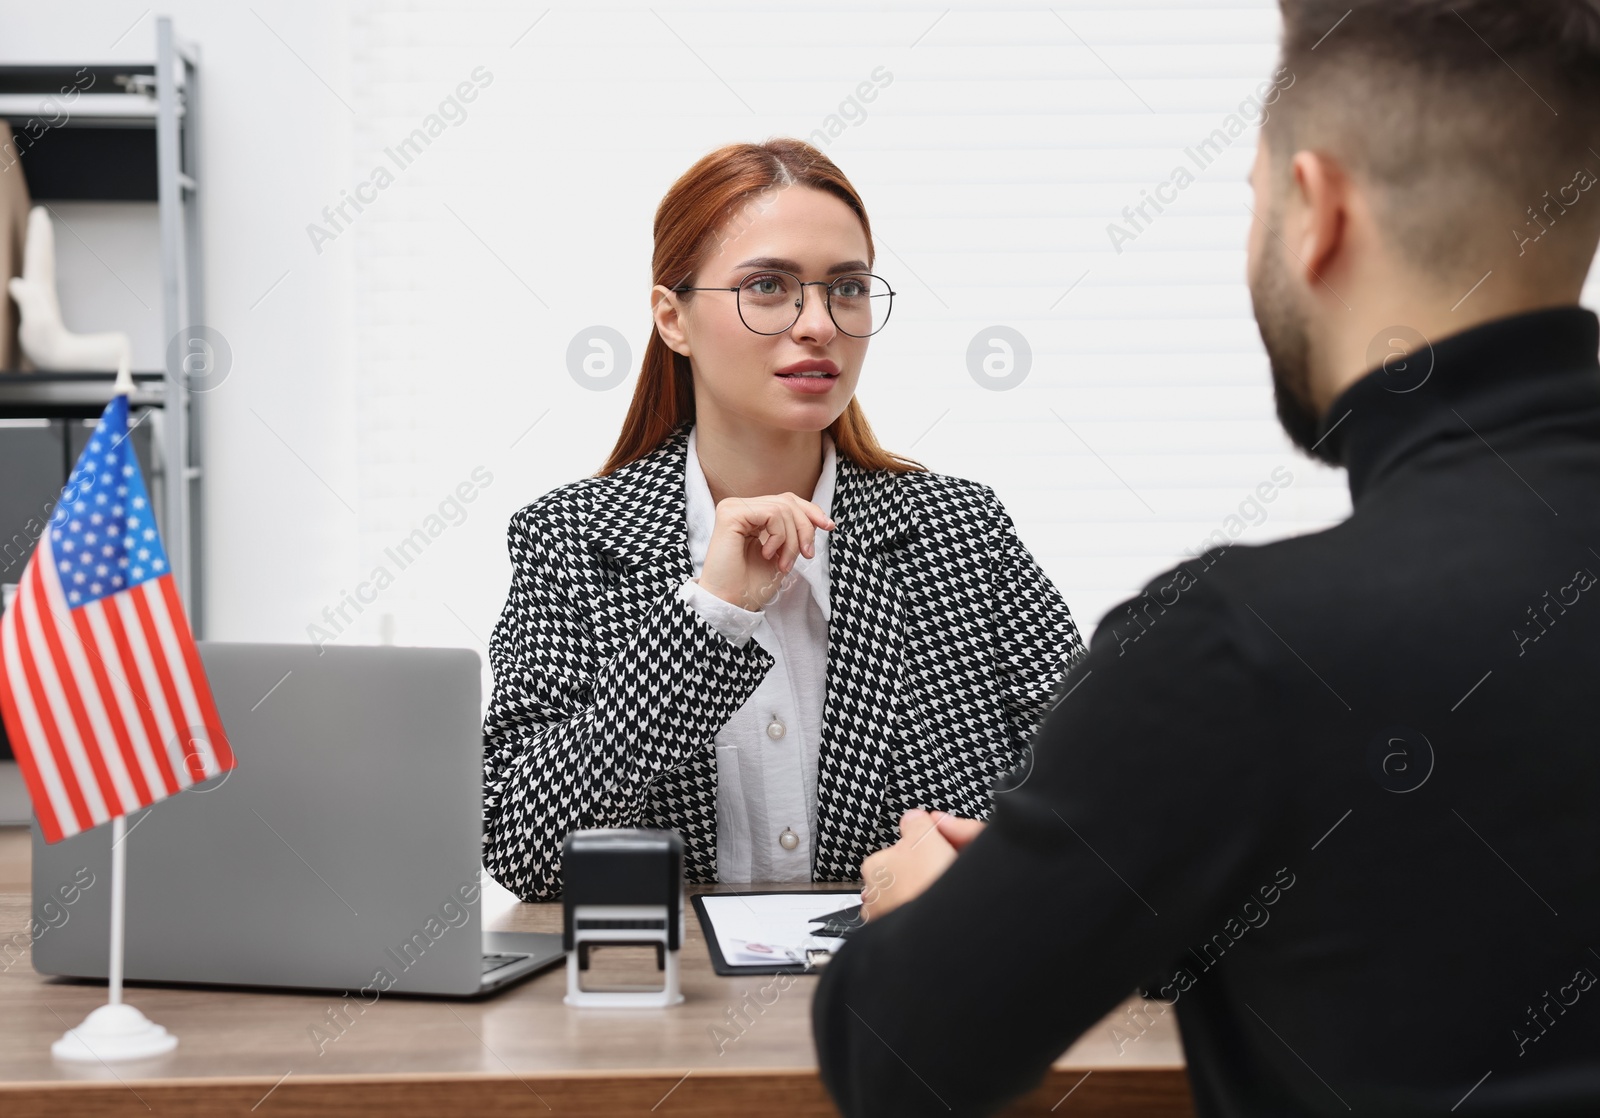 Photo of Embassy worker consulting man about immigration to United States of America in office